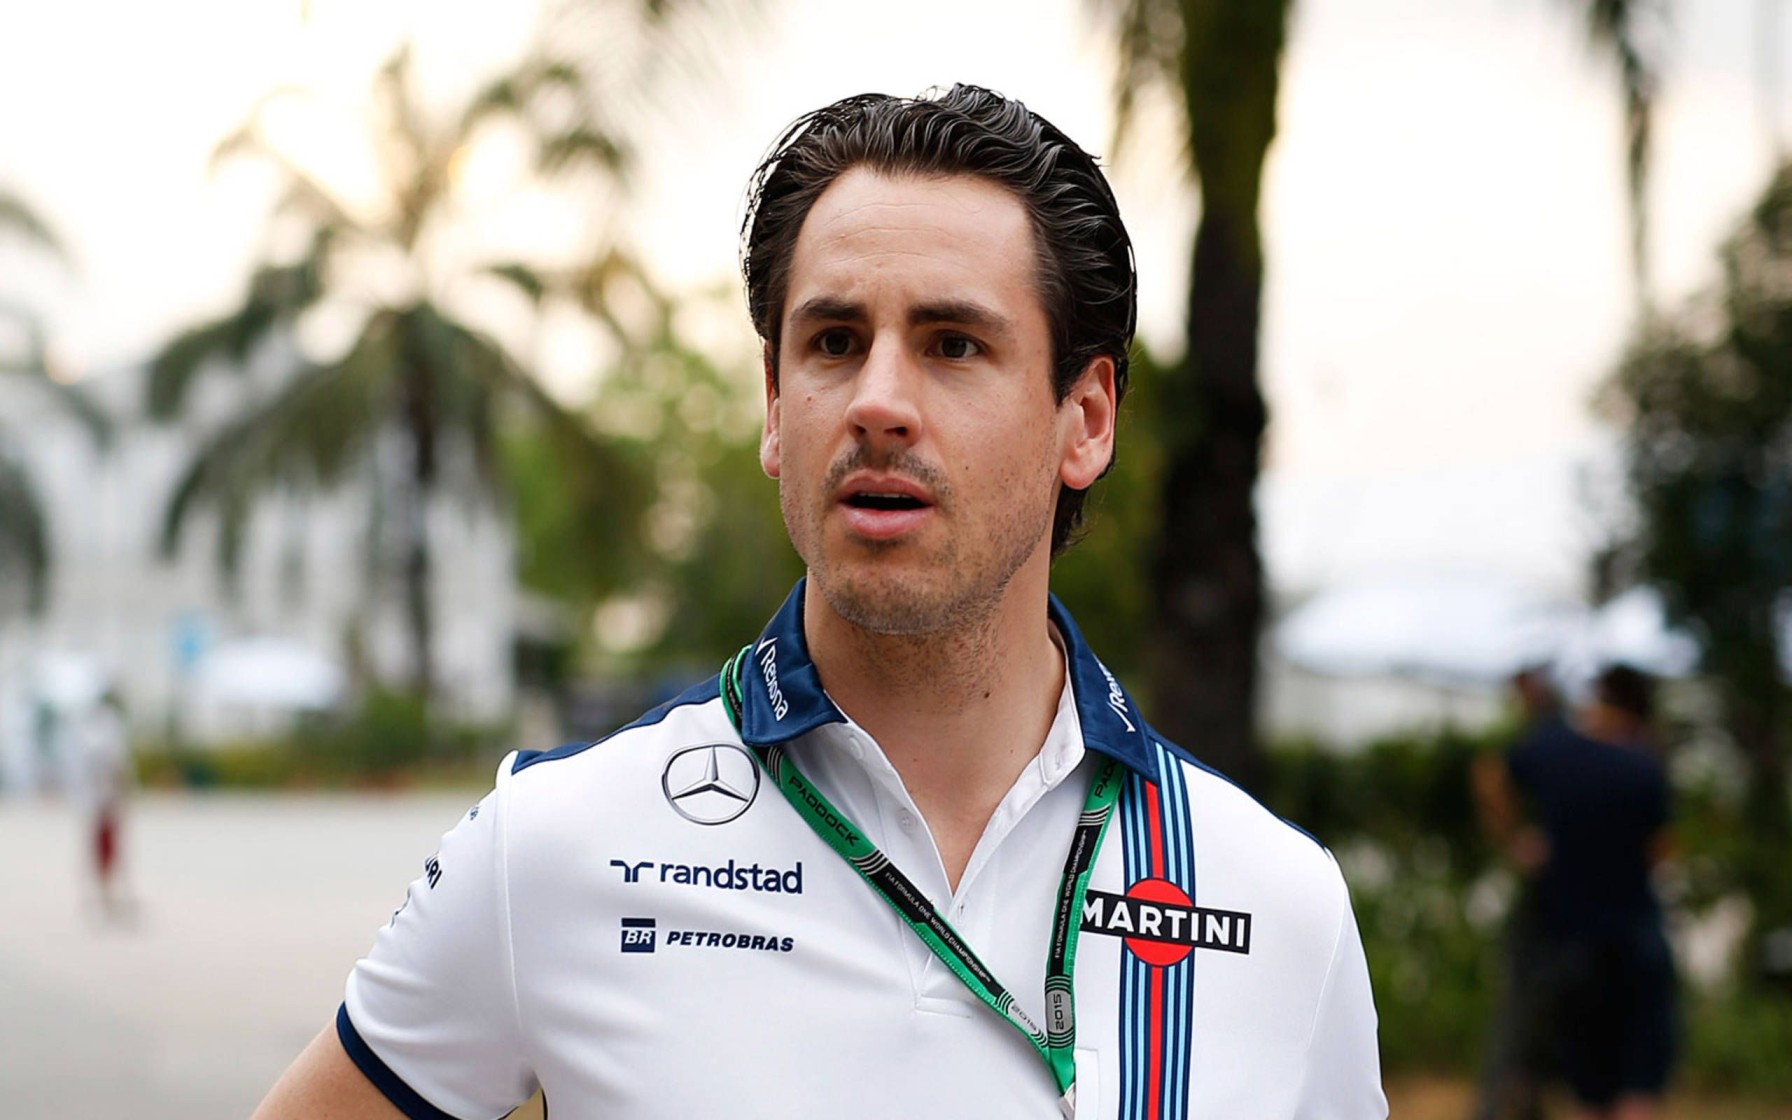 How tall is Adrian Sutil?